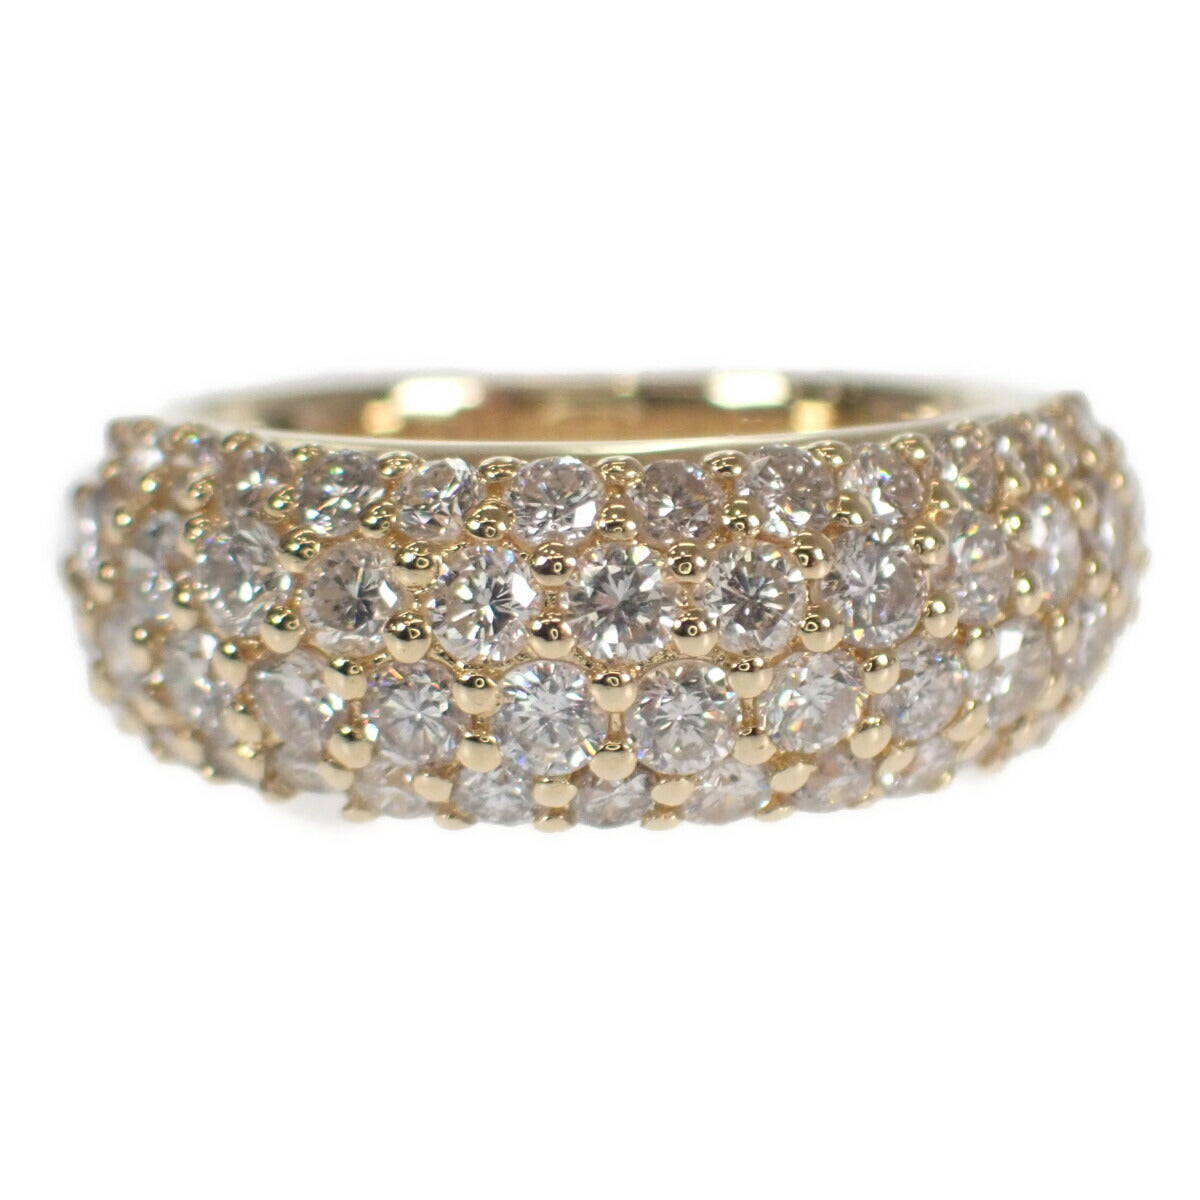 [LuxUness]  K18YG Pave Ring D1.50ct - Gold & Diamond Elegance, Size 9 in Excellent condition